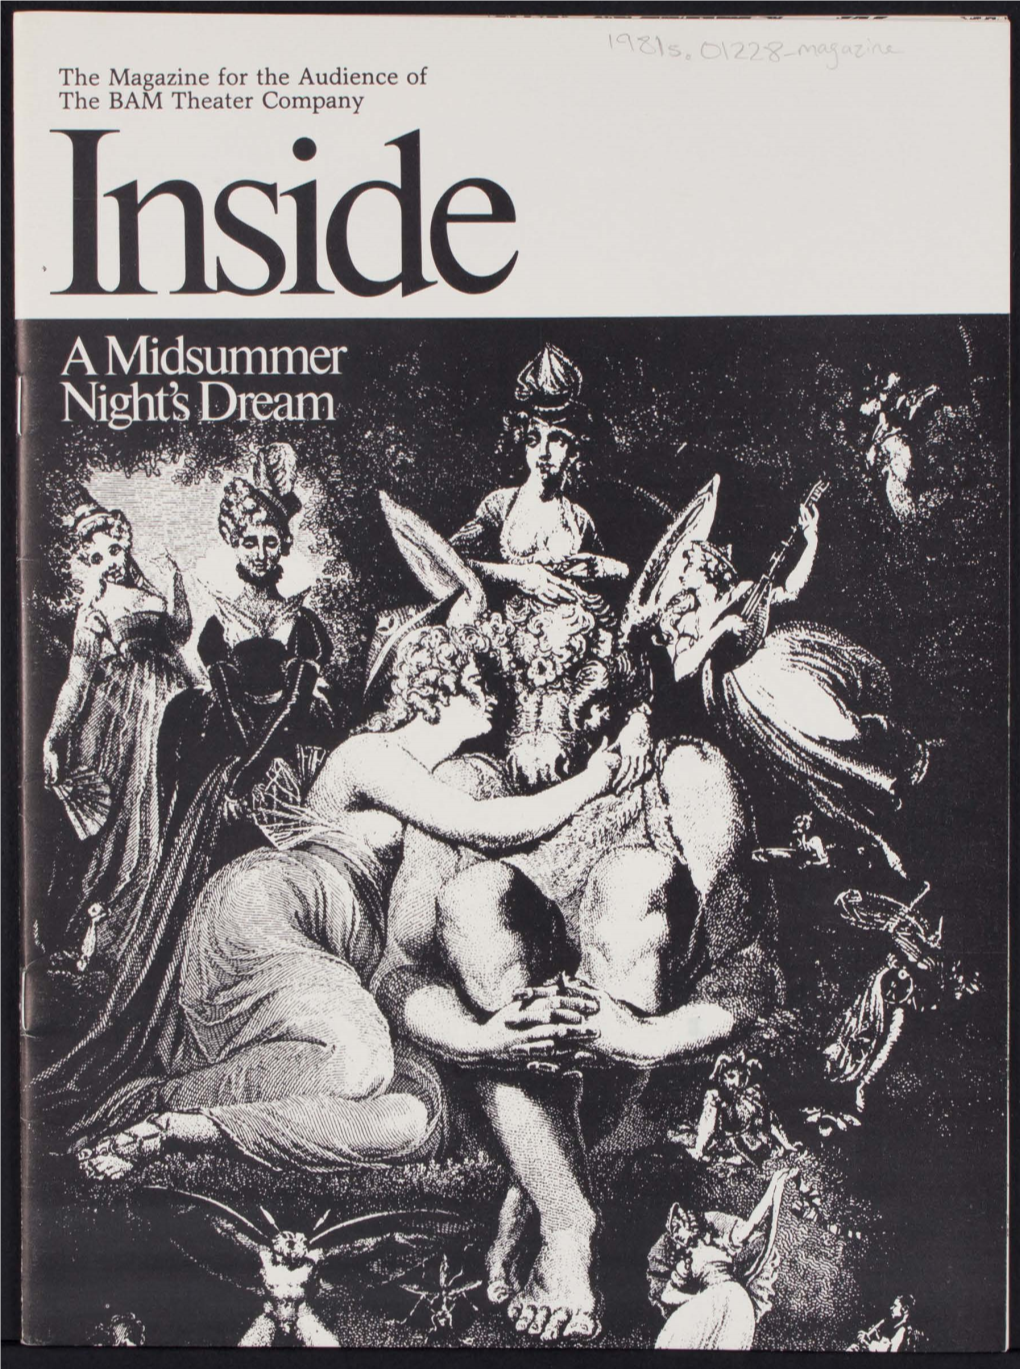 The Magazine for the Audience of the BAM Theater Company